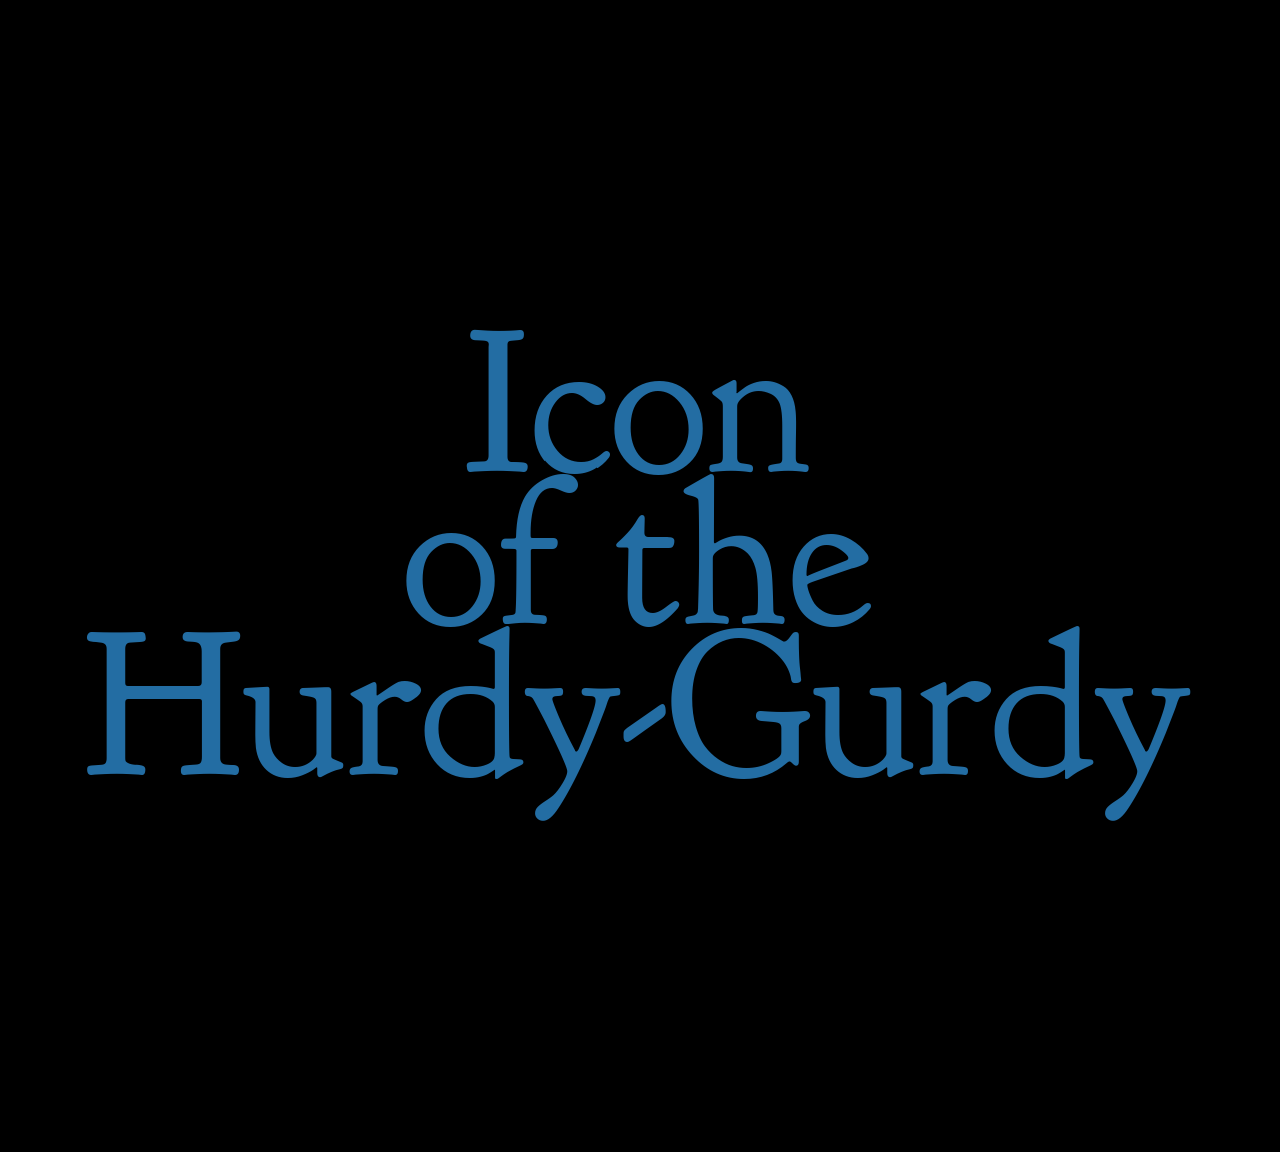 Icon of the Hurdy-Gurdy